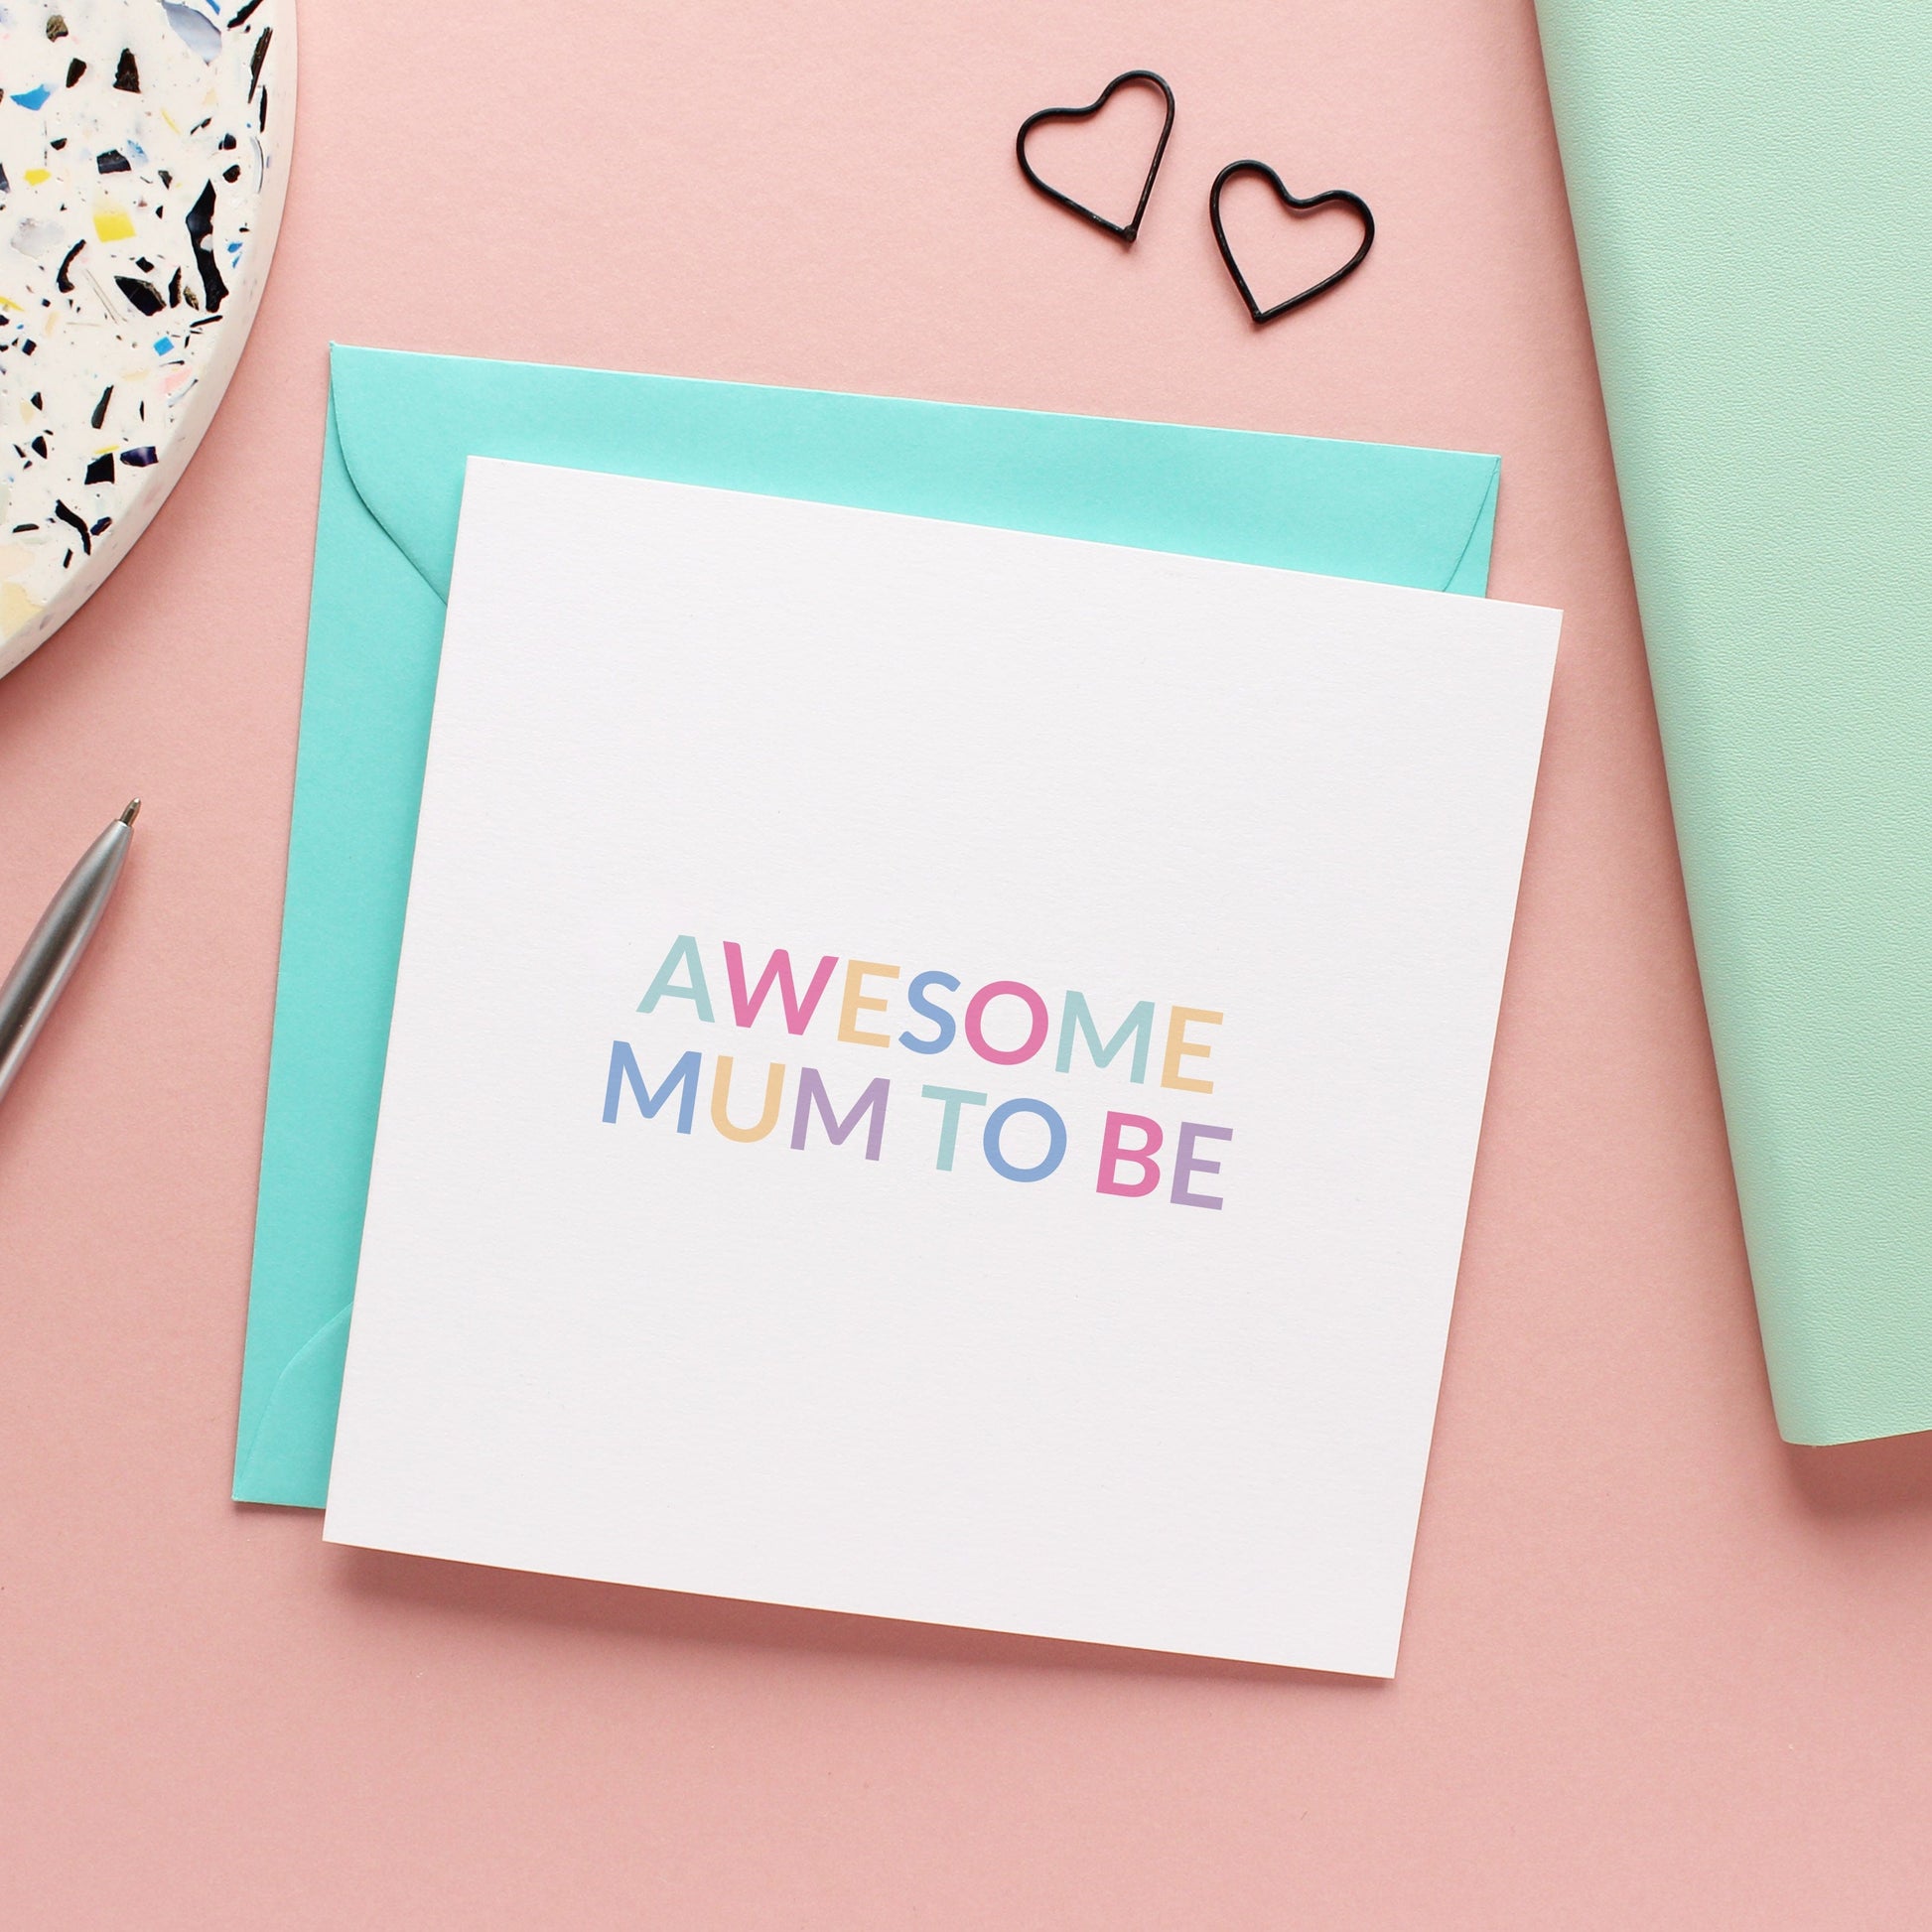 Awesome mum to be card from Purple Tree Designs